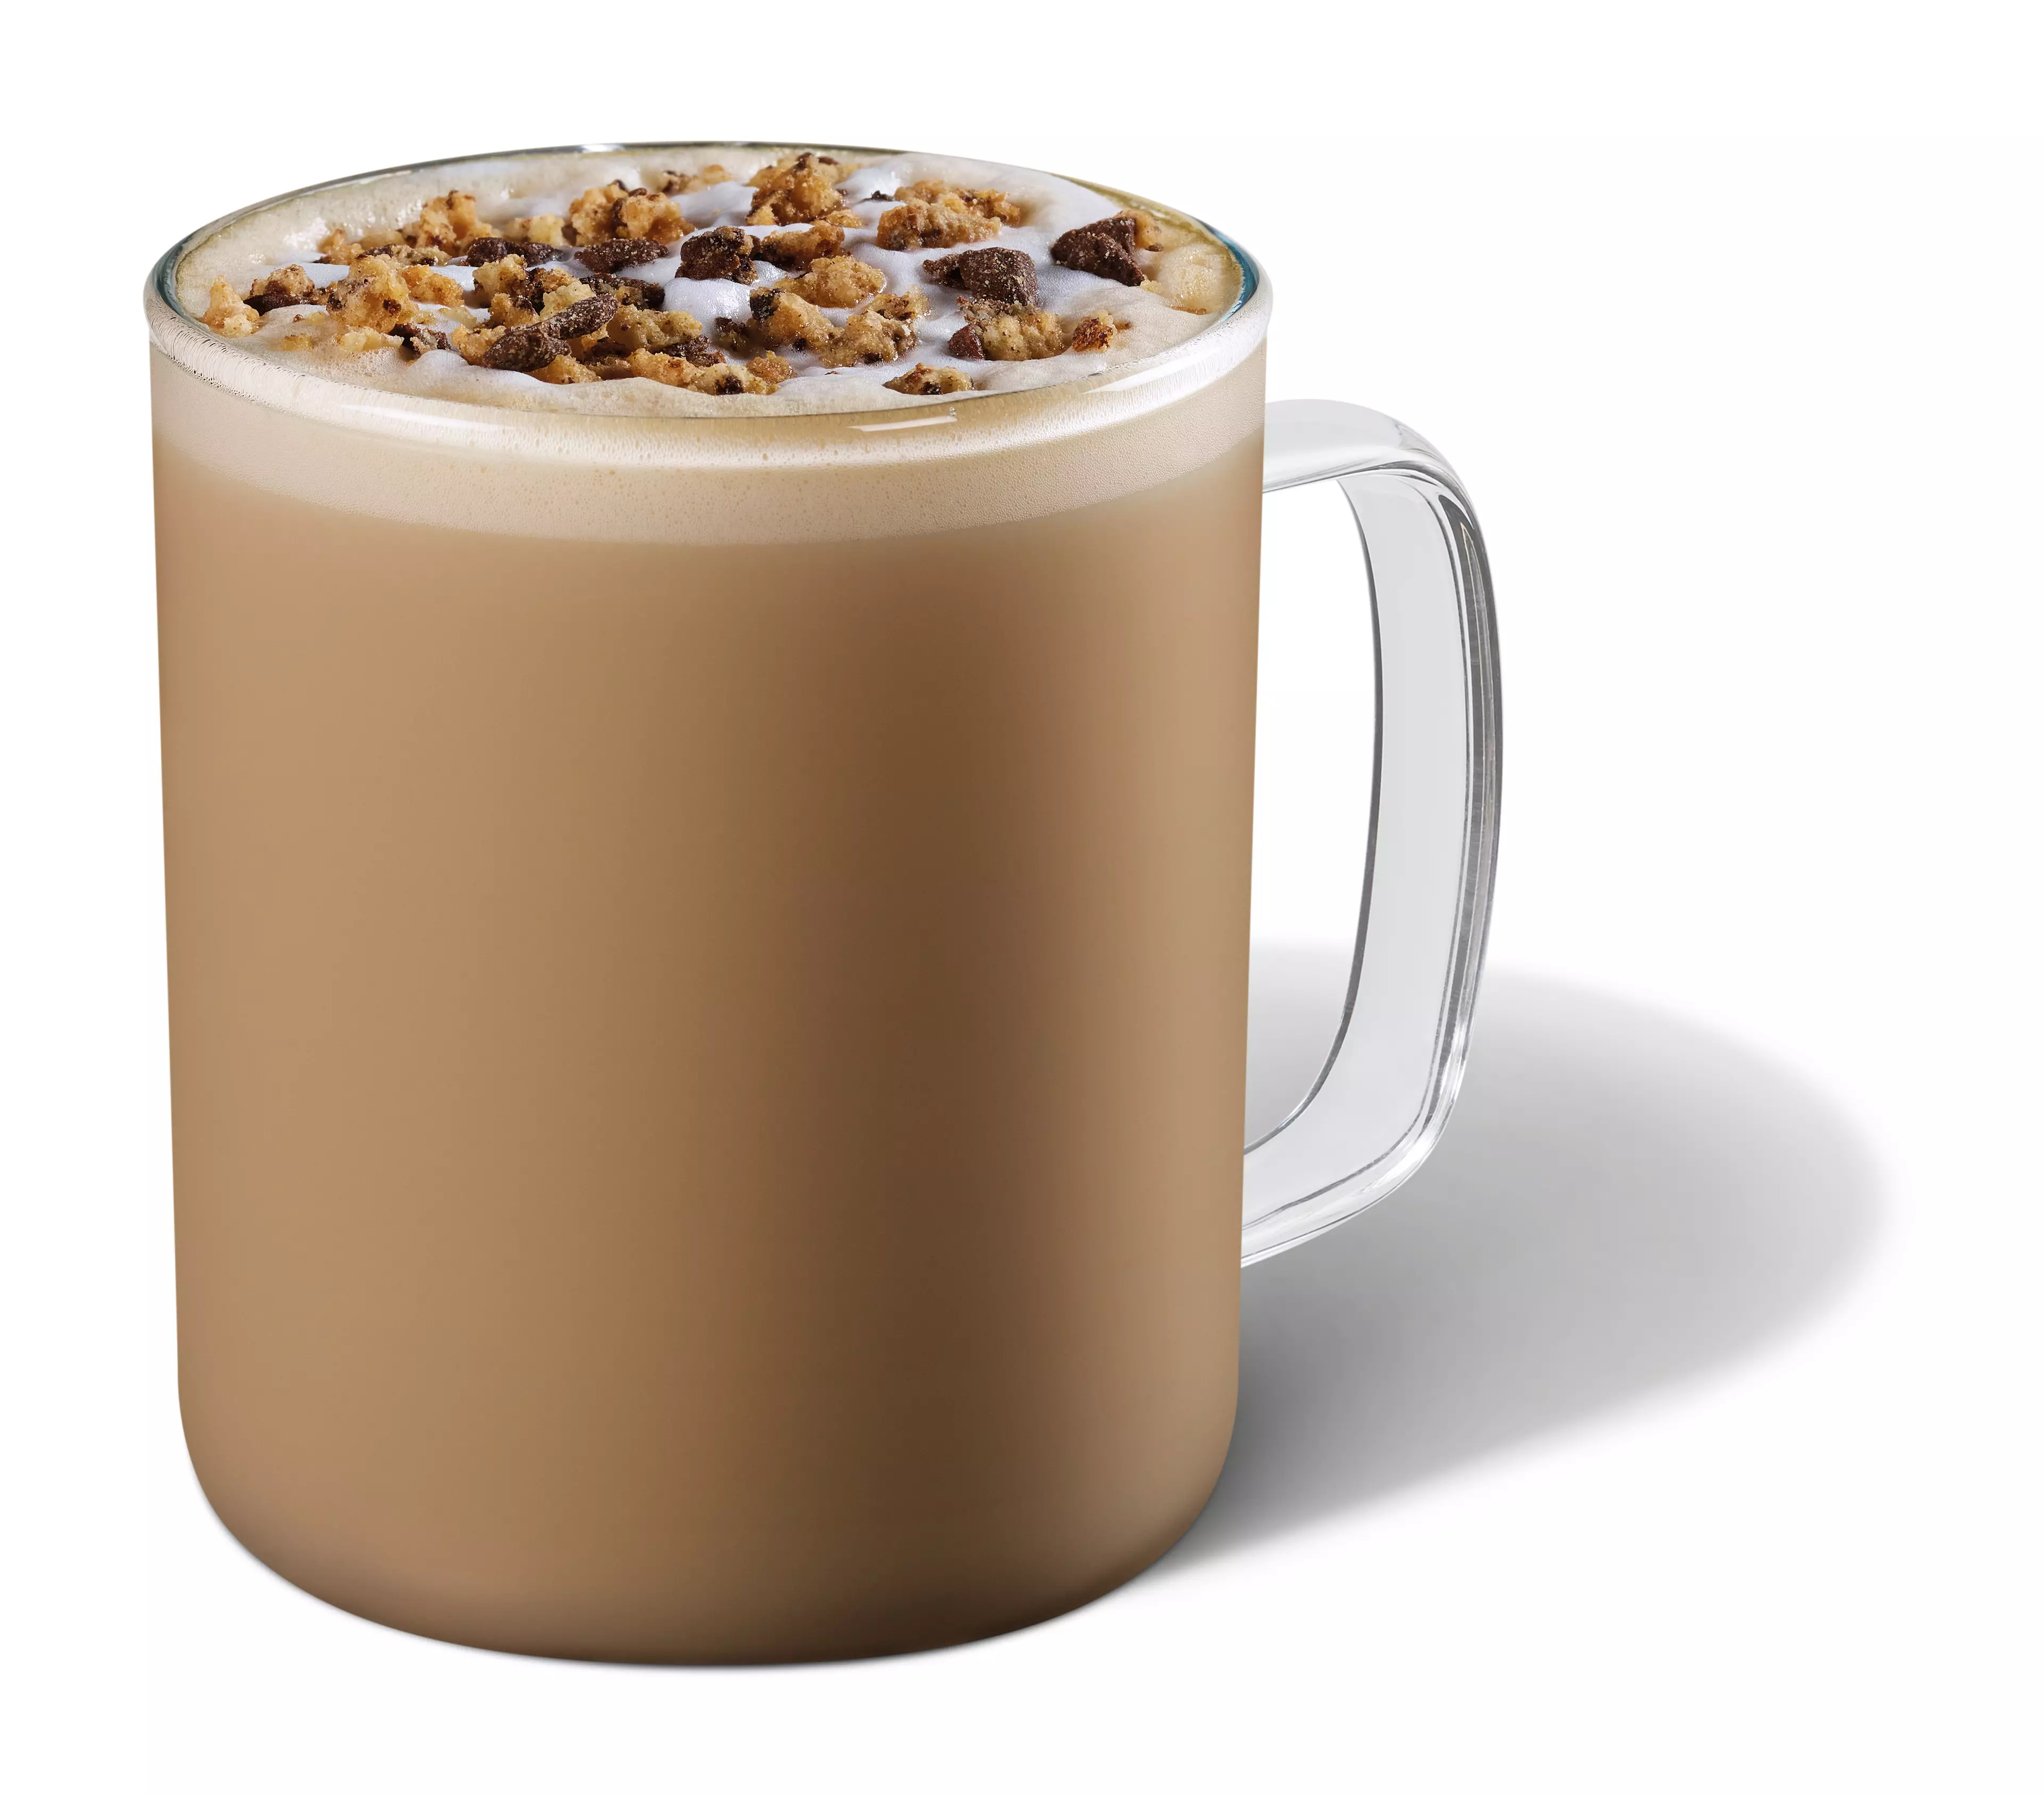 The latte is finished with a sprinkling of beautifully crunchy chocolate cookie crumble topping (